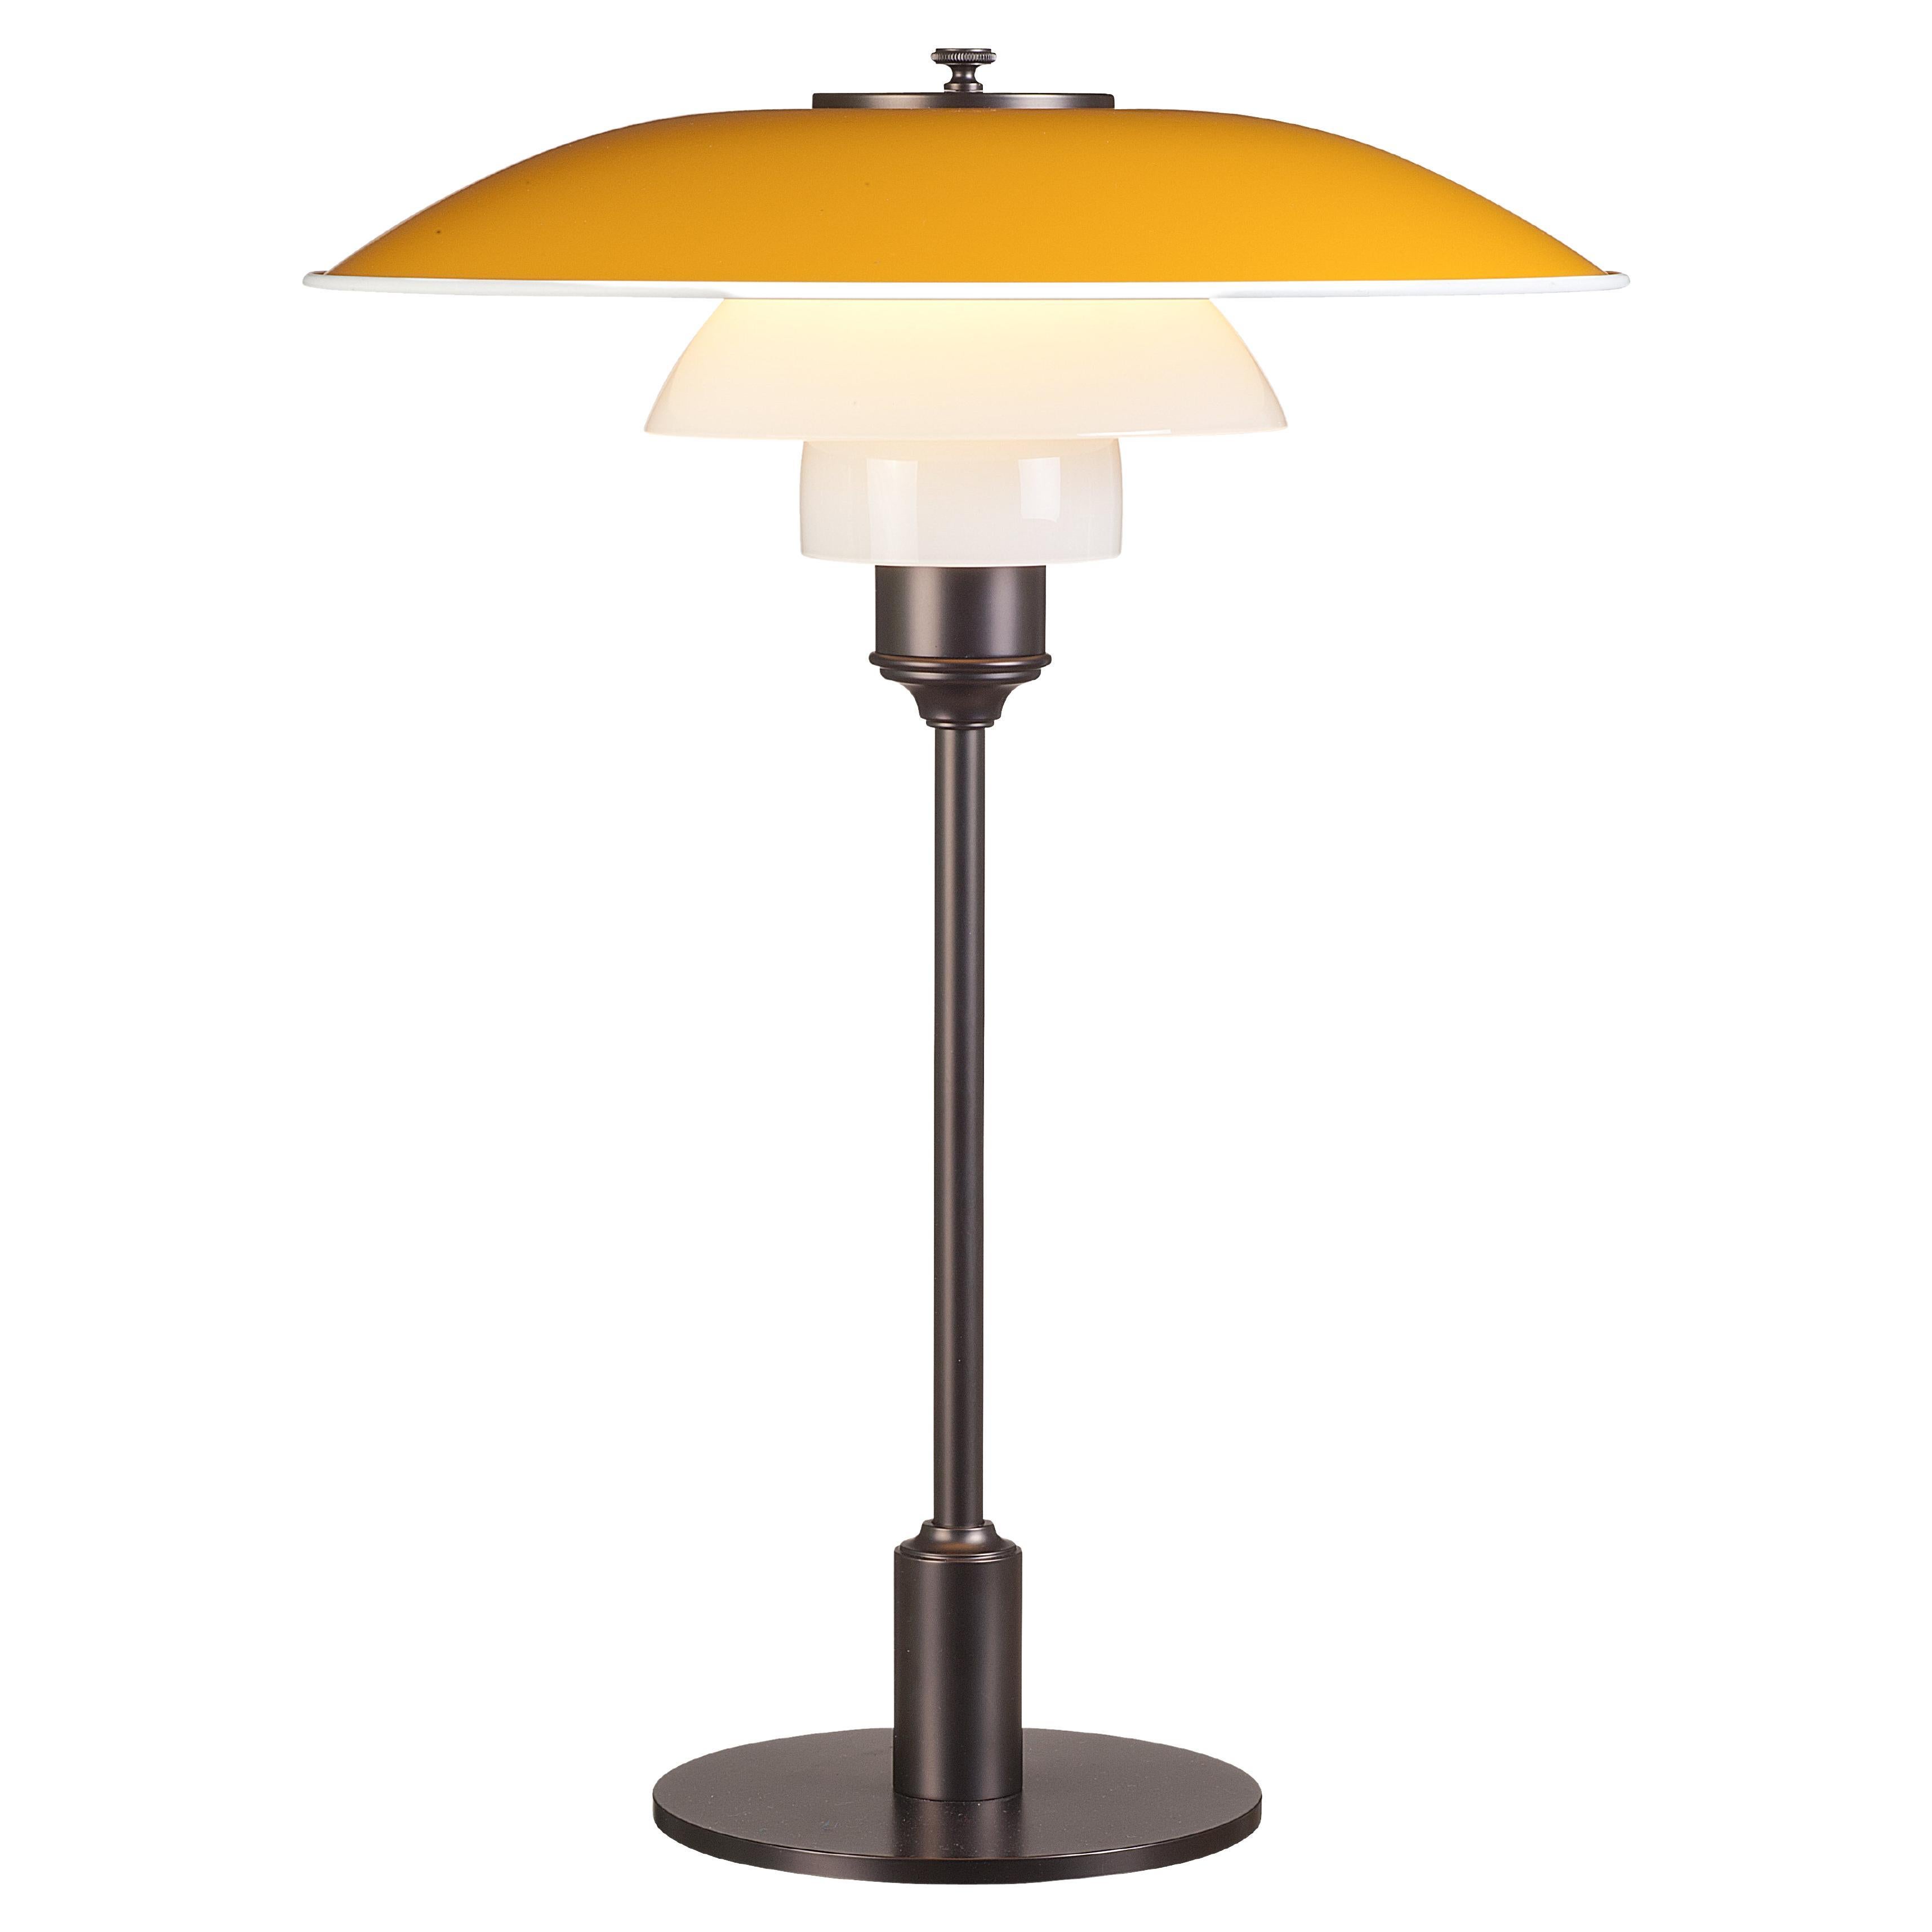 Poul Henningsen PH 3½-2½ table lamp for Louis Poulsen, Denmark.

Poul Henningsen’s legendary design stems from his own, brilliant three-shade system from late 1920s. Poul Henningsen original design from this period was highly functional, some people